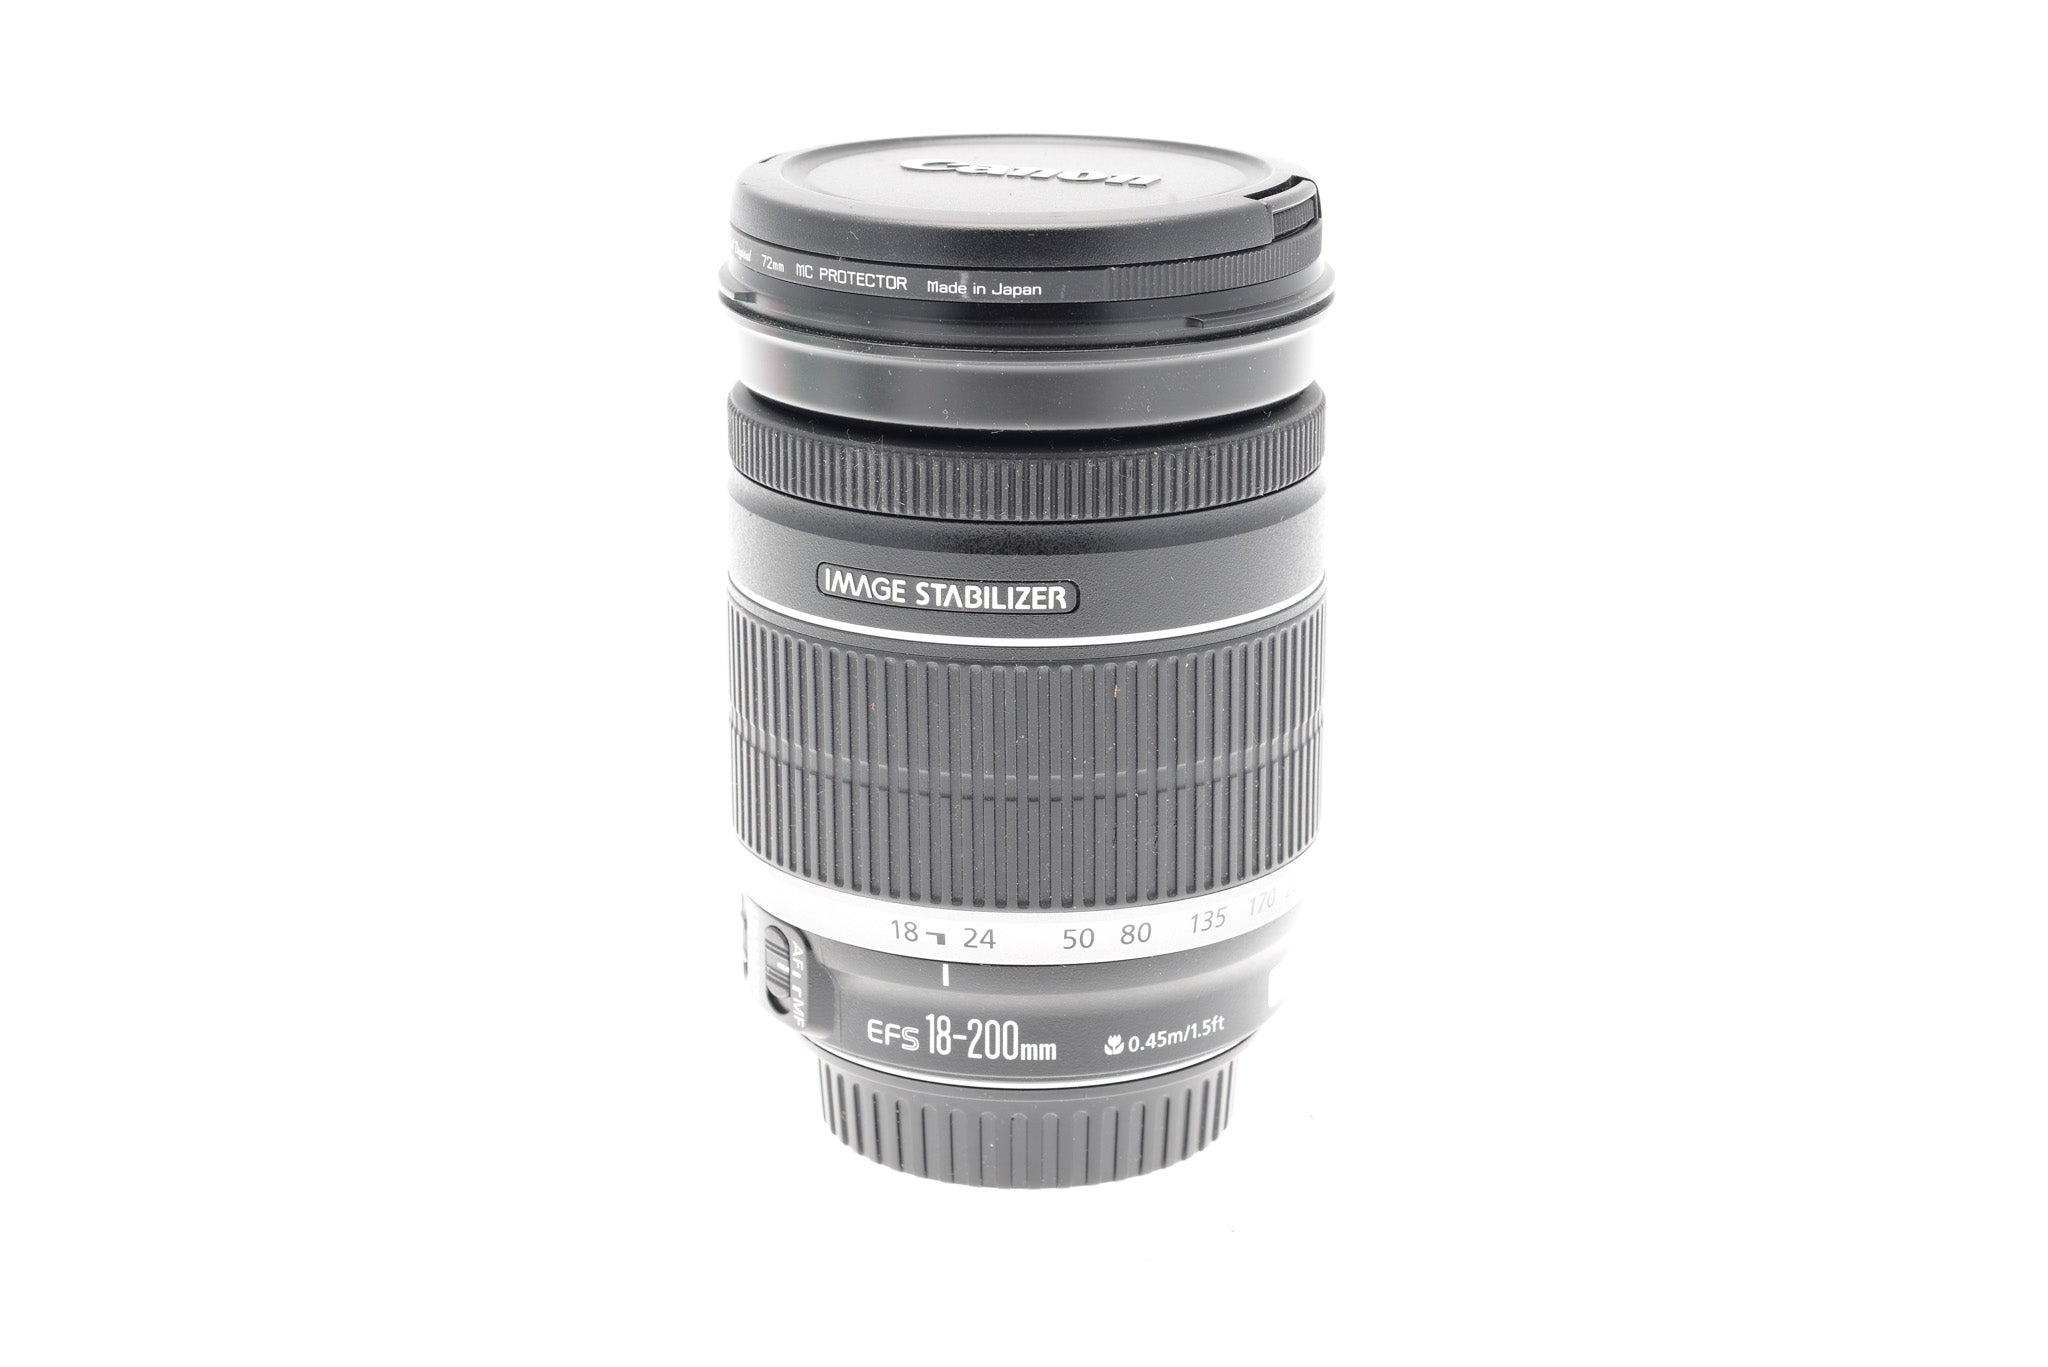 Canon 18-200mm f3.5-5.6 IS - Lens